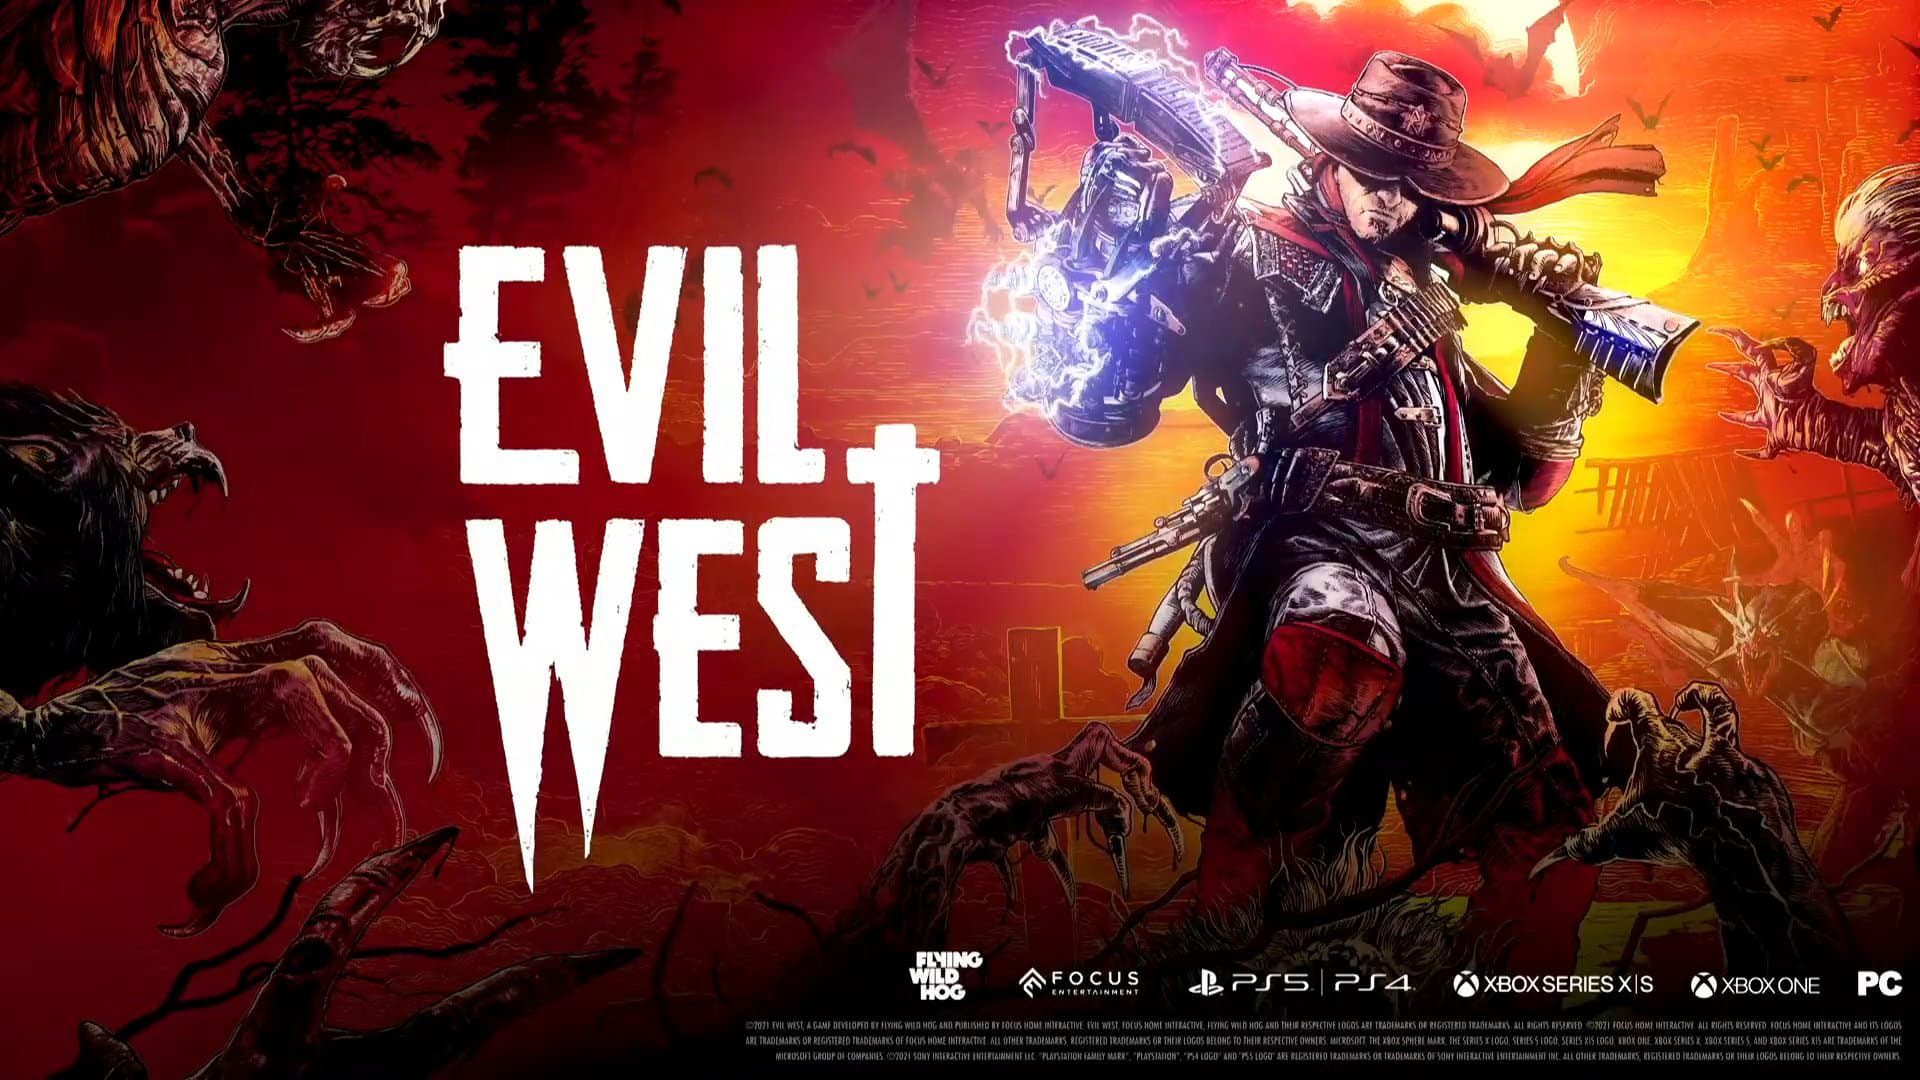 Extended Gameplay Trailer For Evil West Looks Amazing - Gameranx